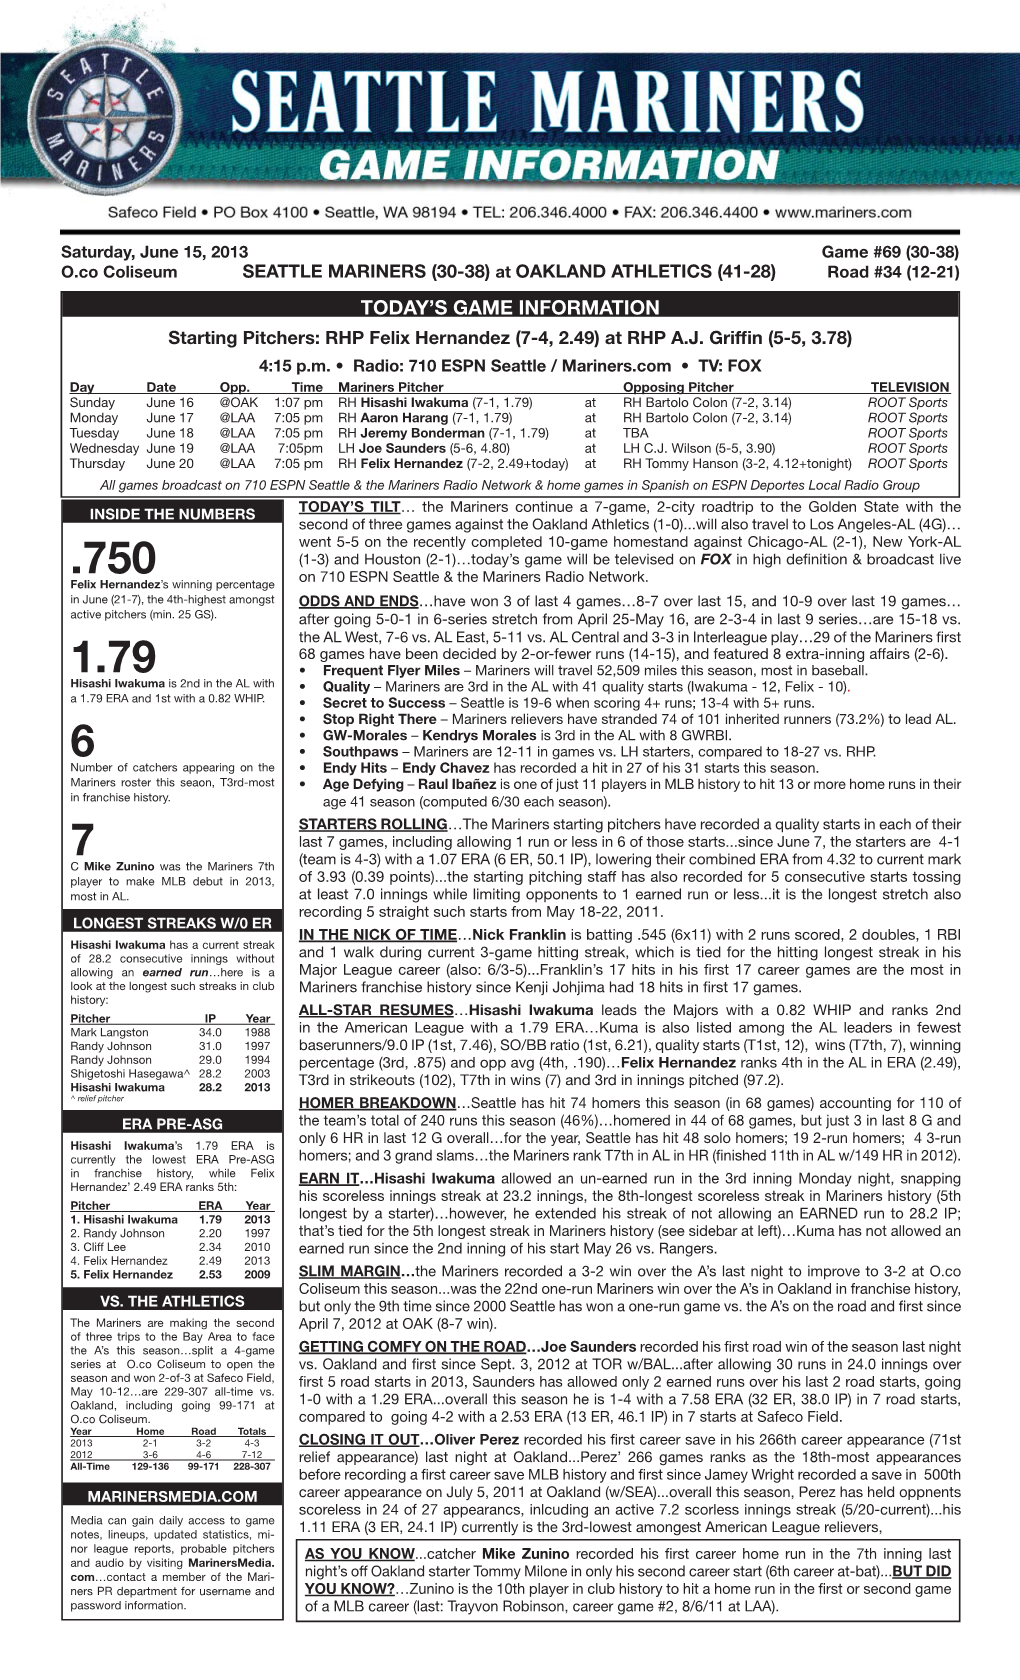 06-15-2013 Mariners Game Notes